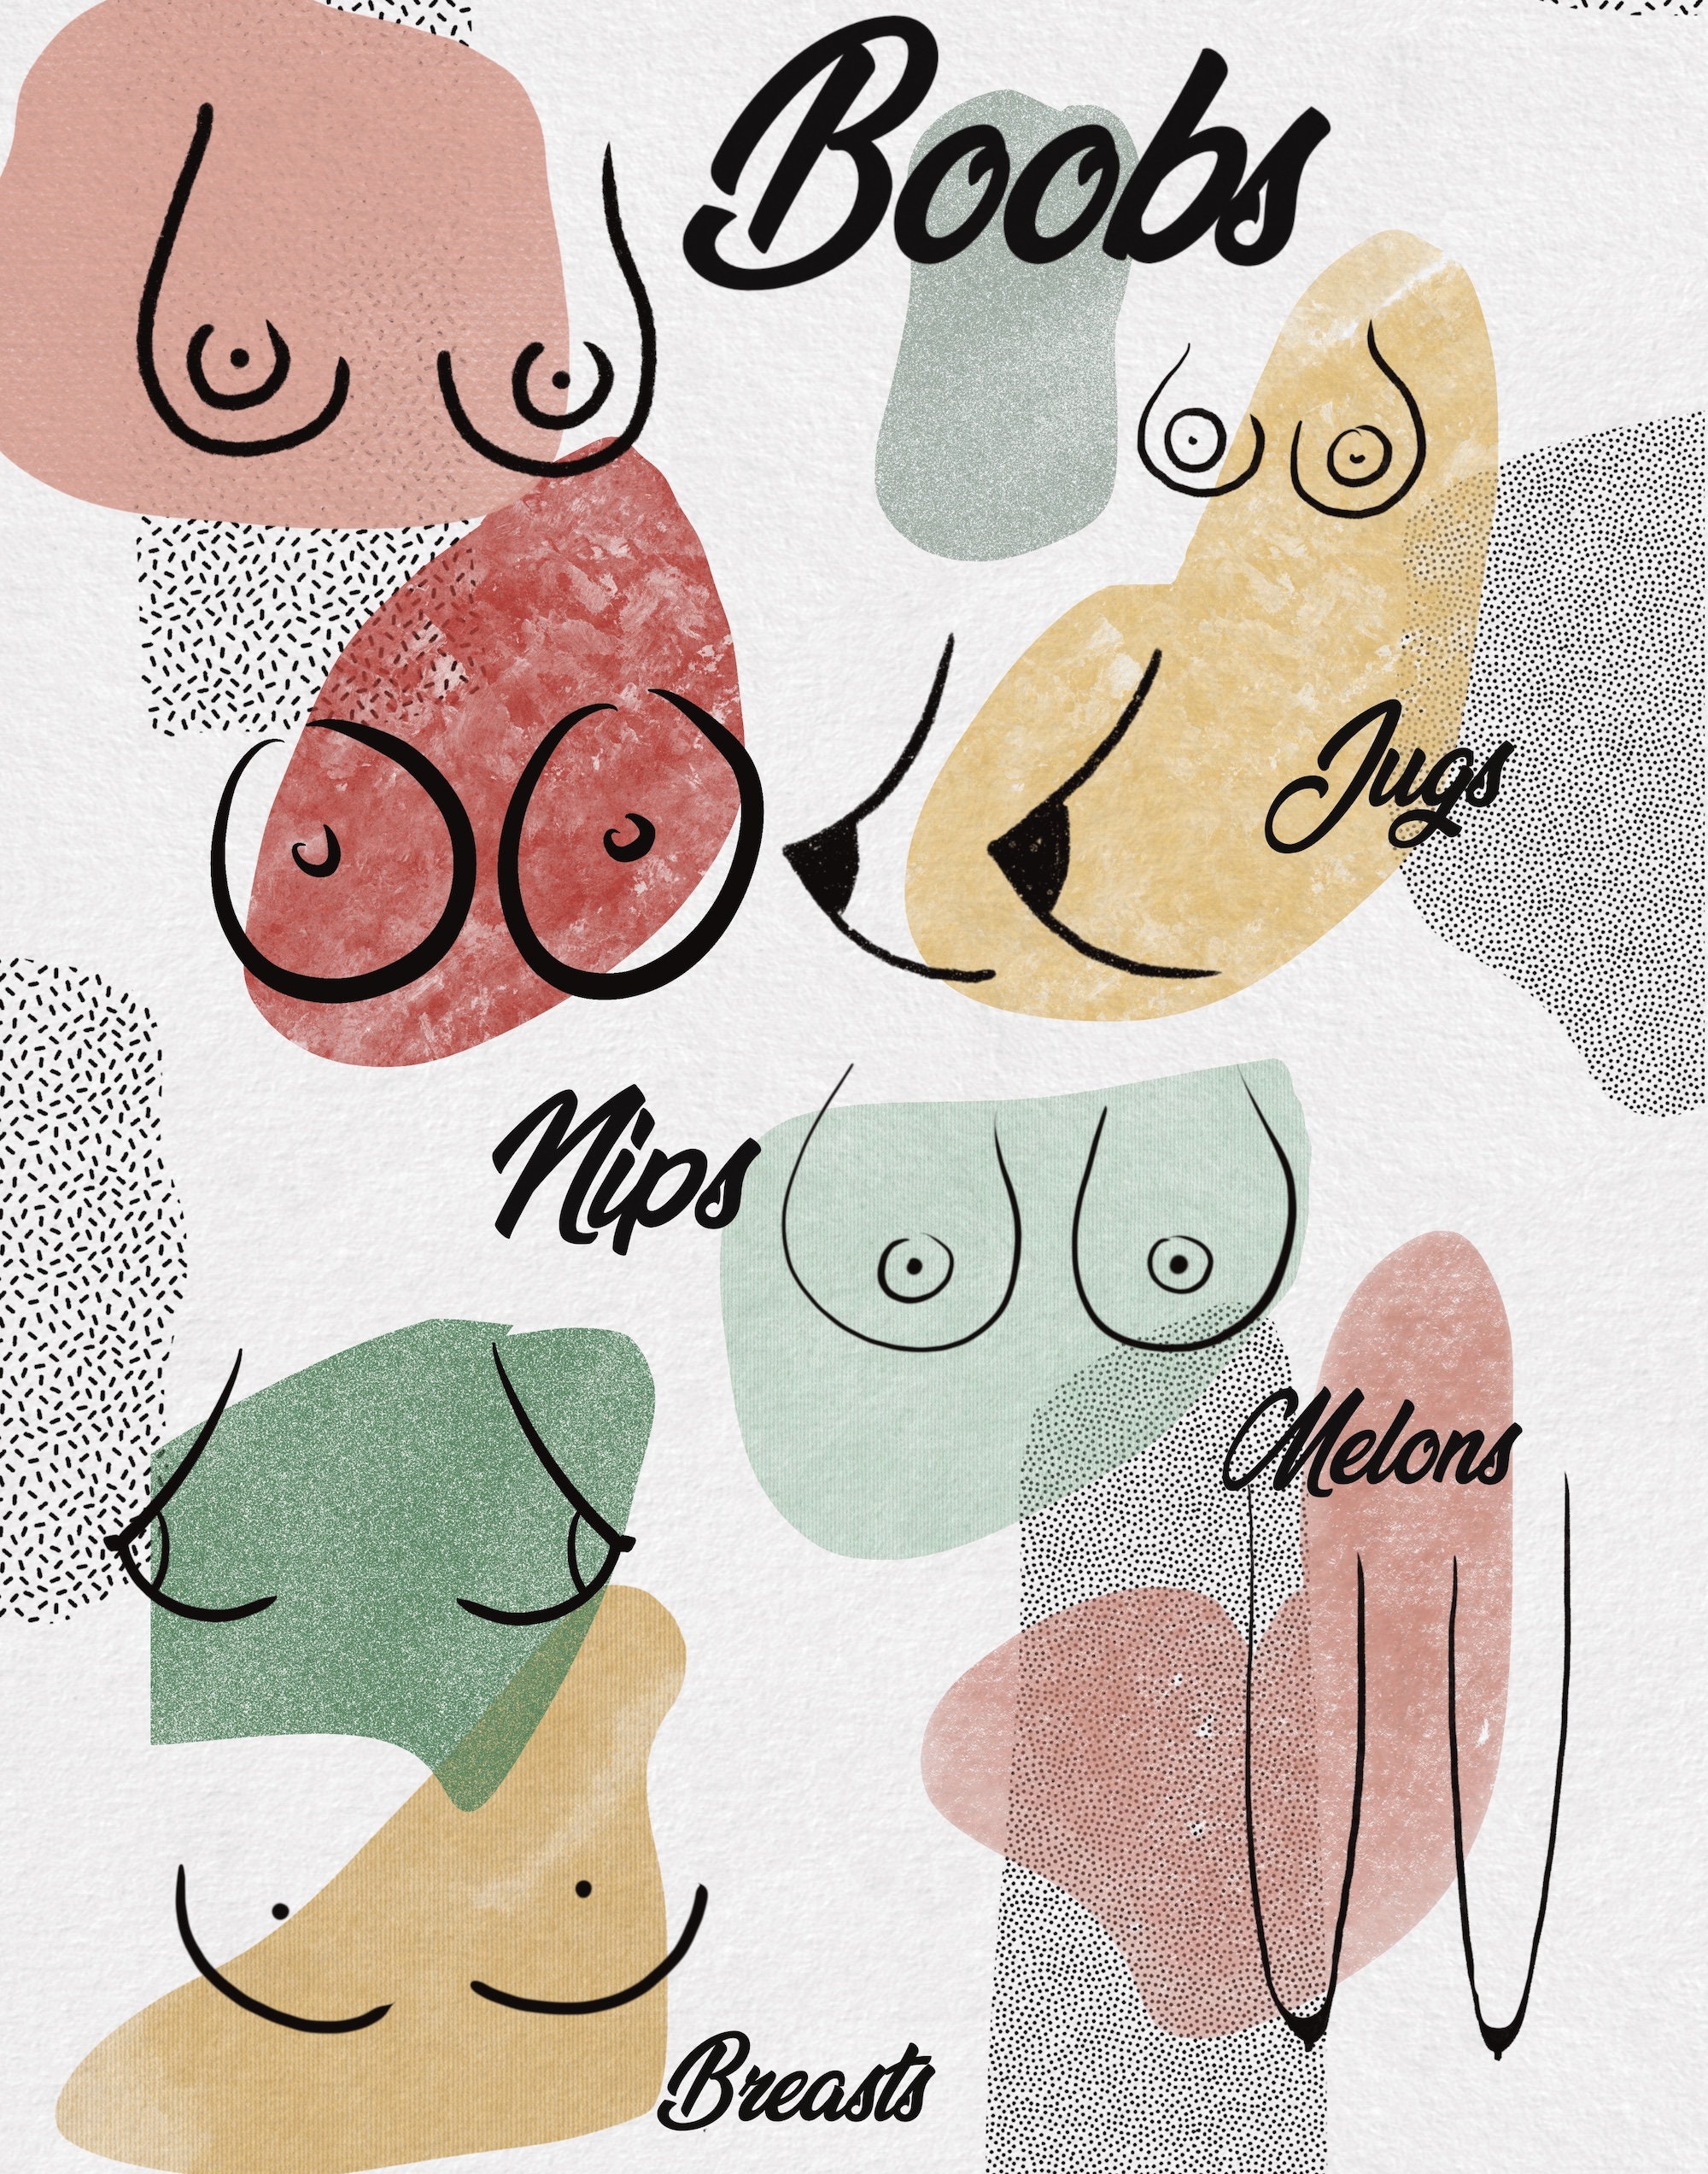 Boobs, Boobs, and More Boobs Female Women LGBTQ Gay Breasts Figure Drawing  Retro -  Ireland